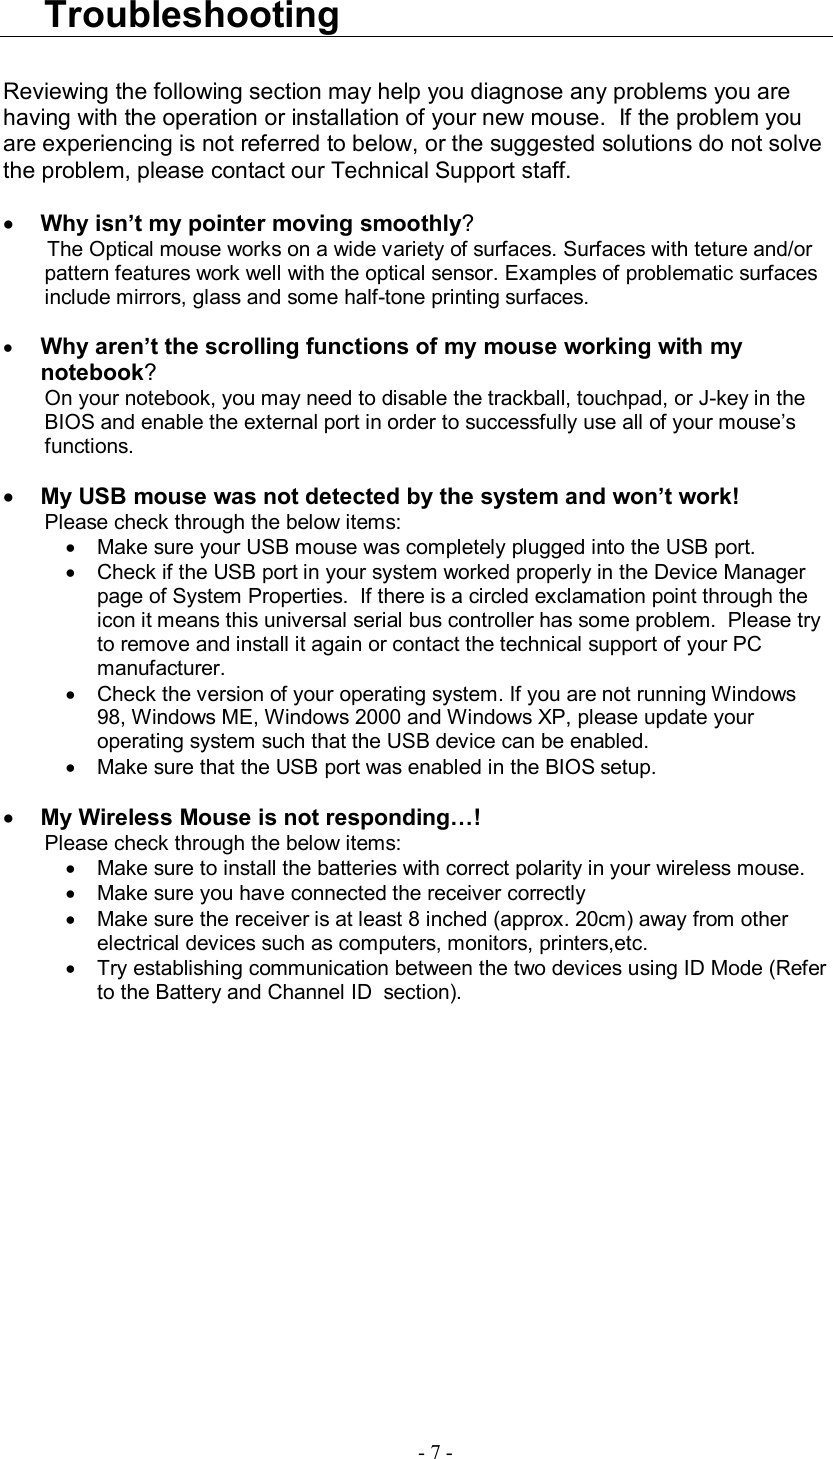  - 7 - Troubleshooting  Reviewing the following section may help you diagnose any problems you are having with the operation or installation of your new mouse.  If the problem you are experiencing is not referred to below, or the suggested solutions do not solve the problem, please contact our Technical Support staff.    · Why isn’t my pointer moving smoothly? The Optical mouse works on a wide variety of surfaces. Surfaces with teture and/or pattern features work well with the optical sensor. Examples of problematic surfaces include mirrors, glass and some half-tone printing surfaces.  · Why aren’t the scrolling functions of my mouse working with my notebook? On your notebook, you may need to disable the trackball, touchpad, or J-key in the BIOS and enable the external port in order to successfully use all of your mouse’s functions.  · My USB mouse was not detected by the system and won’t work! Please check through the below items: · Make sure your USB mouse was completely plugged into the USB port. · Check if the USB port in your system worked properly in the Device Manager page of System Properties.  If there is a circled exclamation point through the icon it means this universal serial bus controller has some problem.  Please try to remove and install it again or contact the technical support of your PC manufacturer. · Check the version of your operating system. If you are not running Windows 98, Windows ME, Windows 2000 and Windows XP, please update your operating system such that the USB device can be enabled. · Make sure that the USB port was enabled in the BIOS setup.  · My Wireless Mouse is not responding…! Please check through the below items: · Make sure to install the batteries with correct polarity in your wireless mouse. · Make sure you have connected the receiver correctly · Make sure the receiver is at least 8 inched (approx. 20cm) away from other electrical devices such as computers, monitors, printers,etc. · Try establishing communication between the two devices using ID Mode (Refer to the Battery and Channel ID  section).      